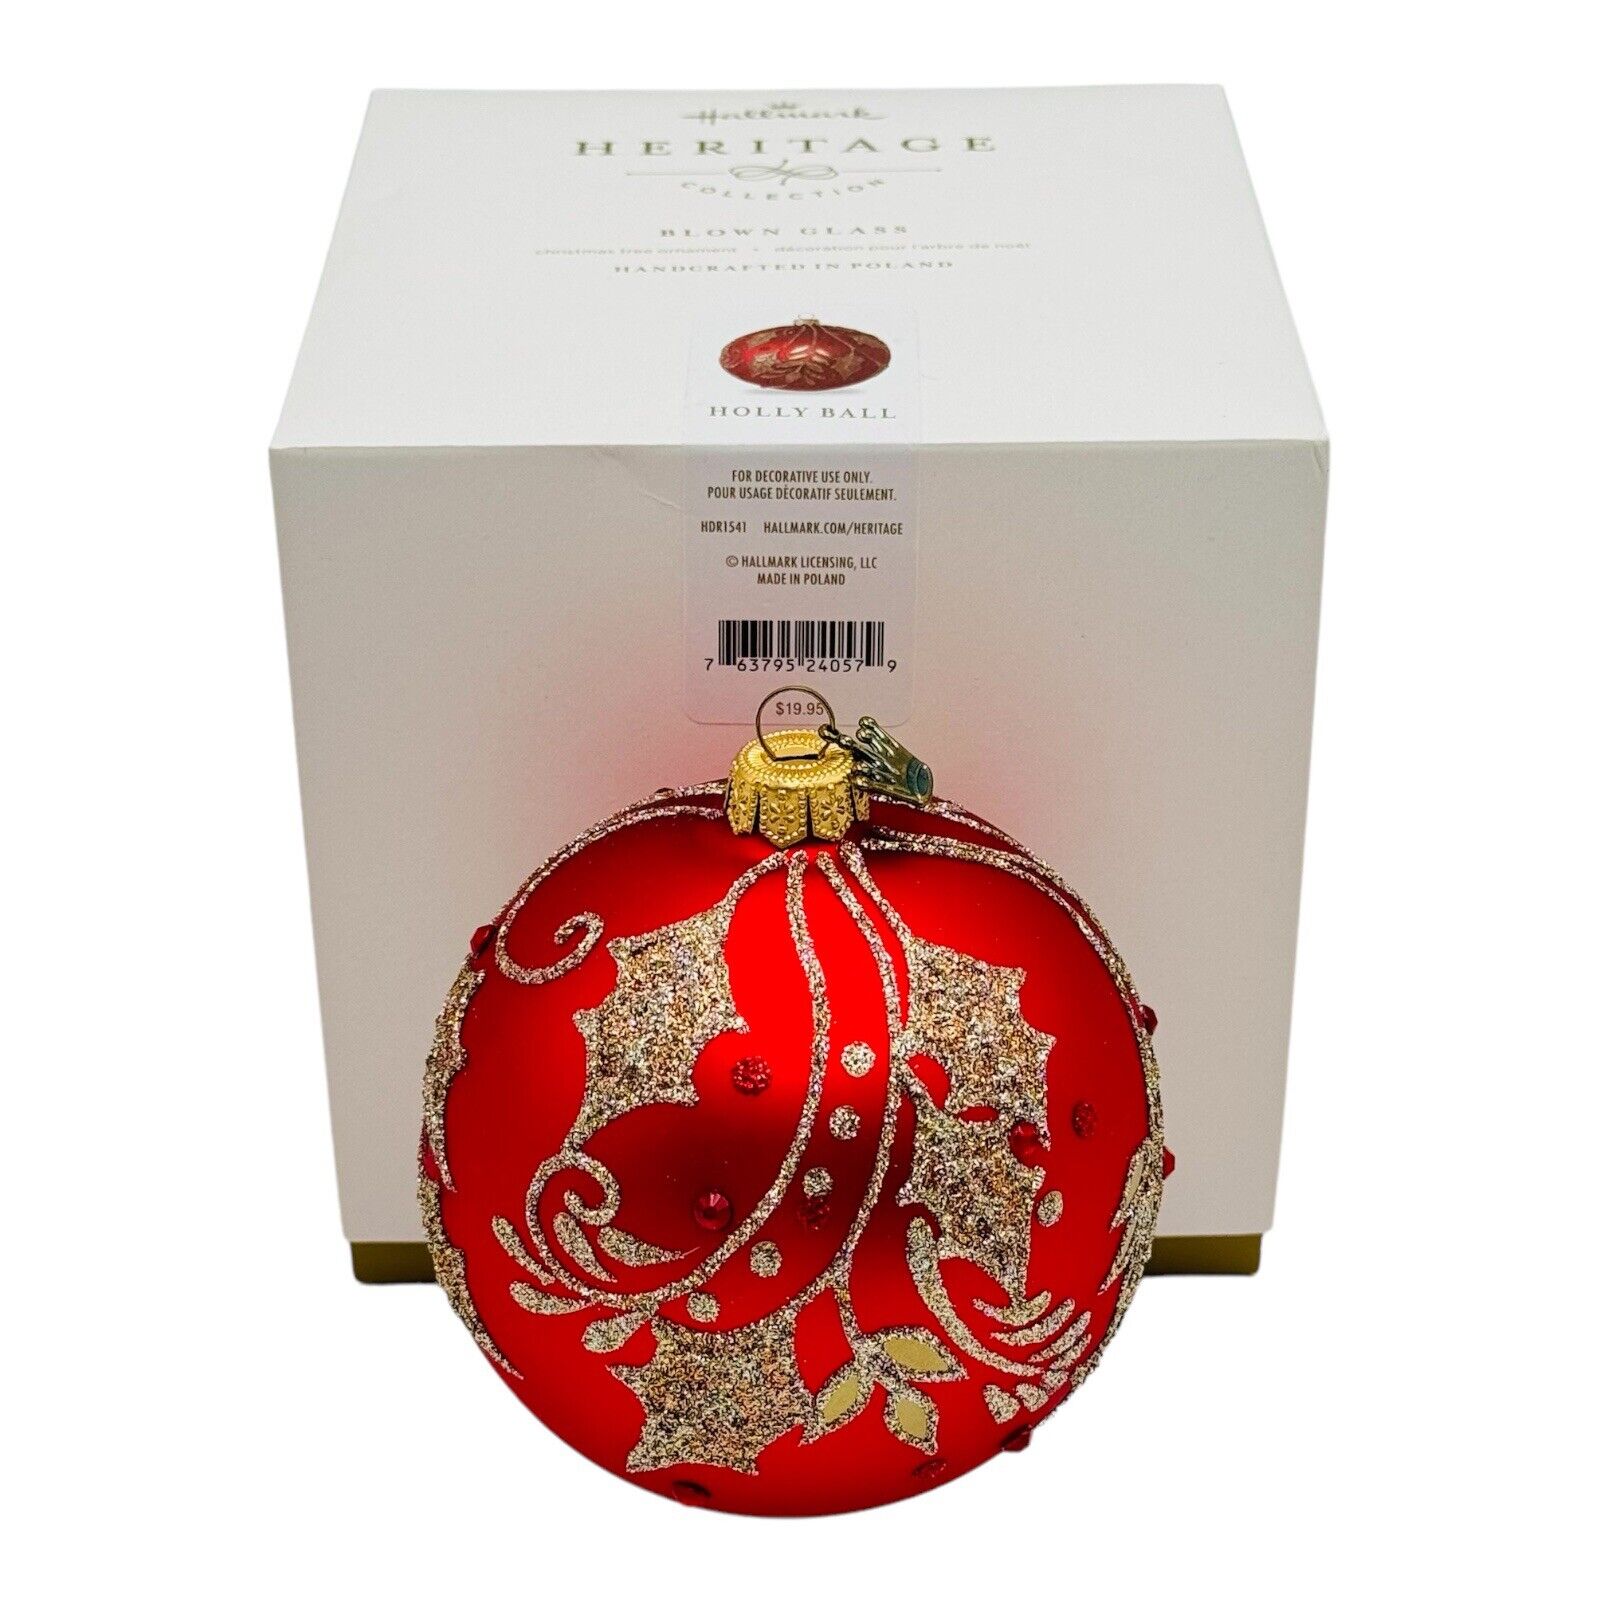 Hallmark Heritage Collection Holly Ball Blown Glass Ball Poland NEW IN BOX